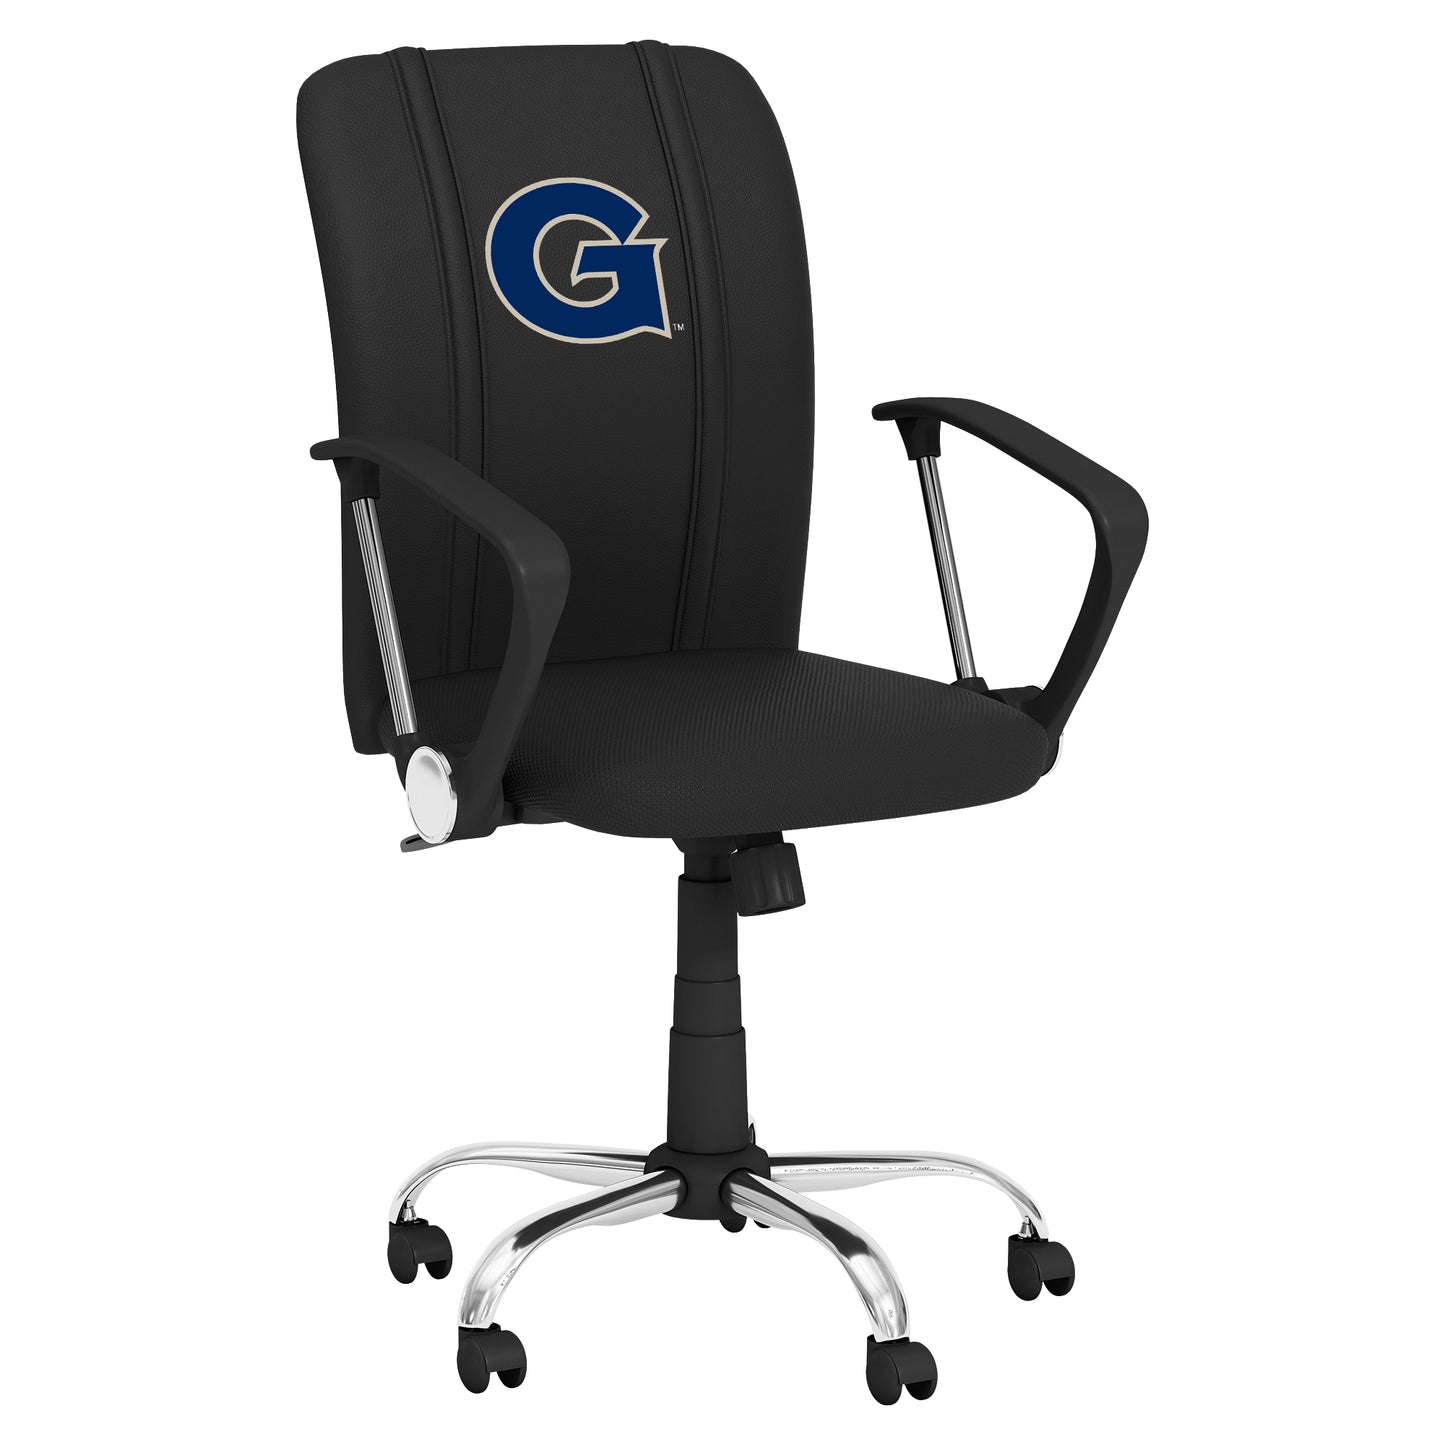 Curve Task Chair with Georgetown Hoyas Primary